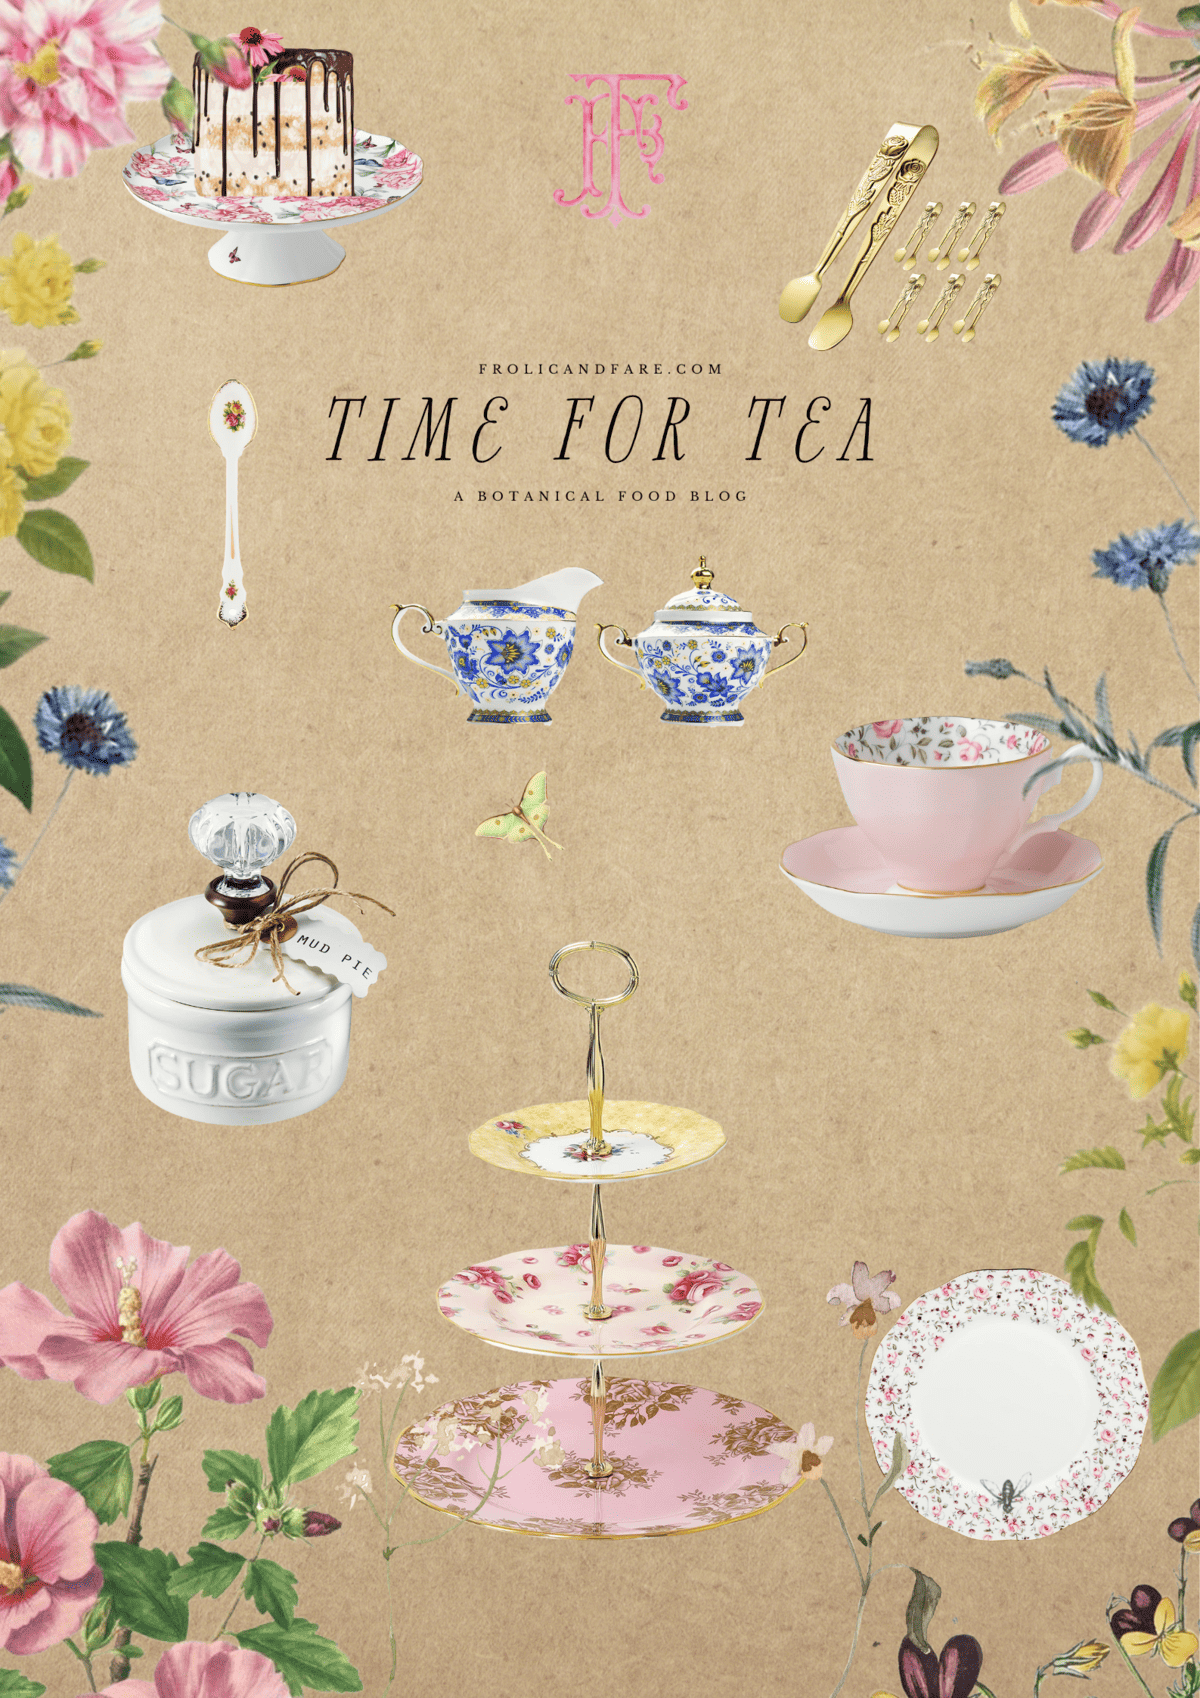 TIME FOR TEA amazon store front 1